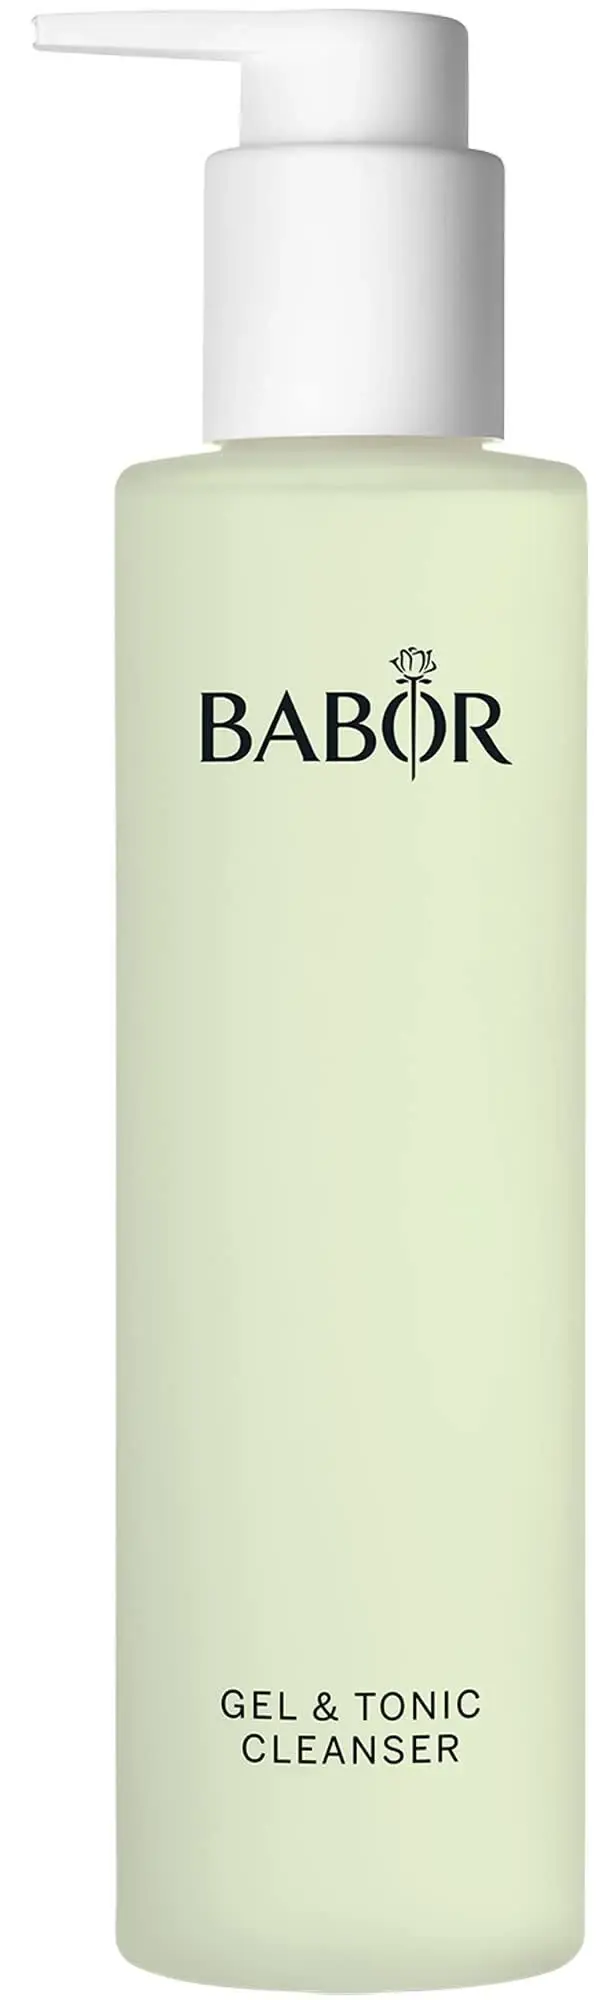 Babor Cleansing Gel & Tonic Cleanser (200 ml)